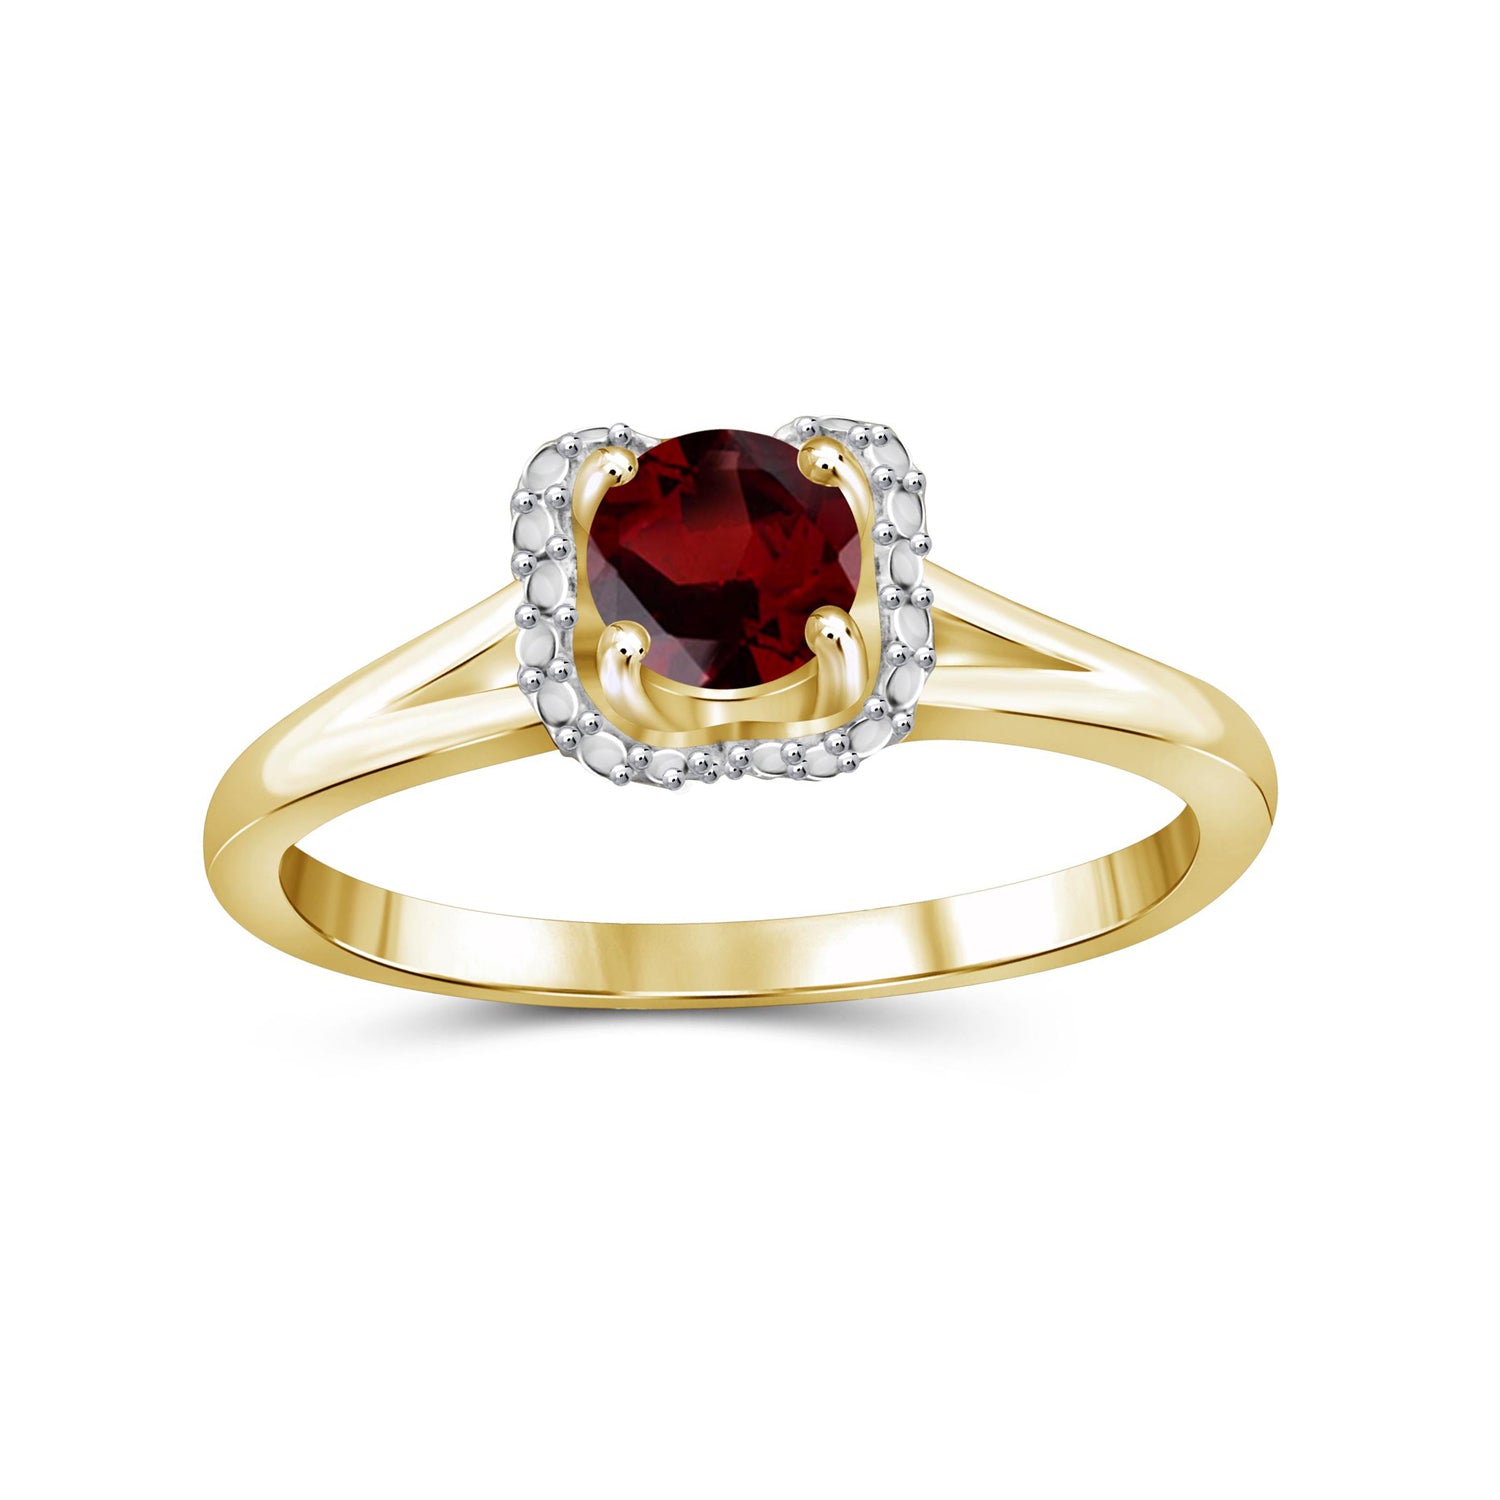 Garnet Ring Birthstone Jewelry – 0.50 Carat Garnet 14K Gold-Plated Ring Jewelry – Gemstone Rings with Hypoallergenic 14K Gold-Plated Band